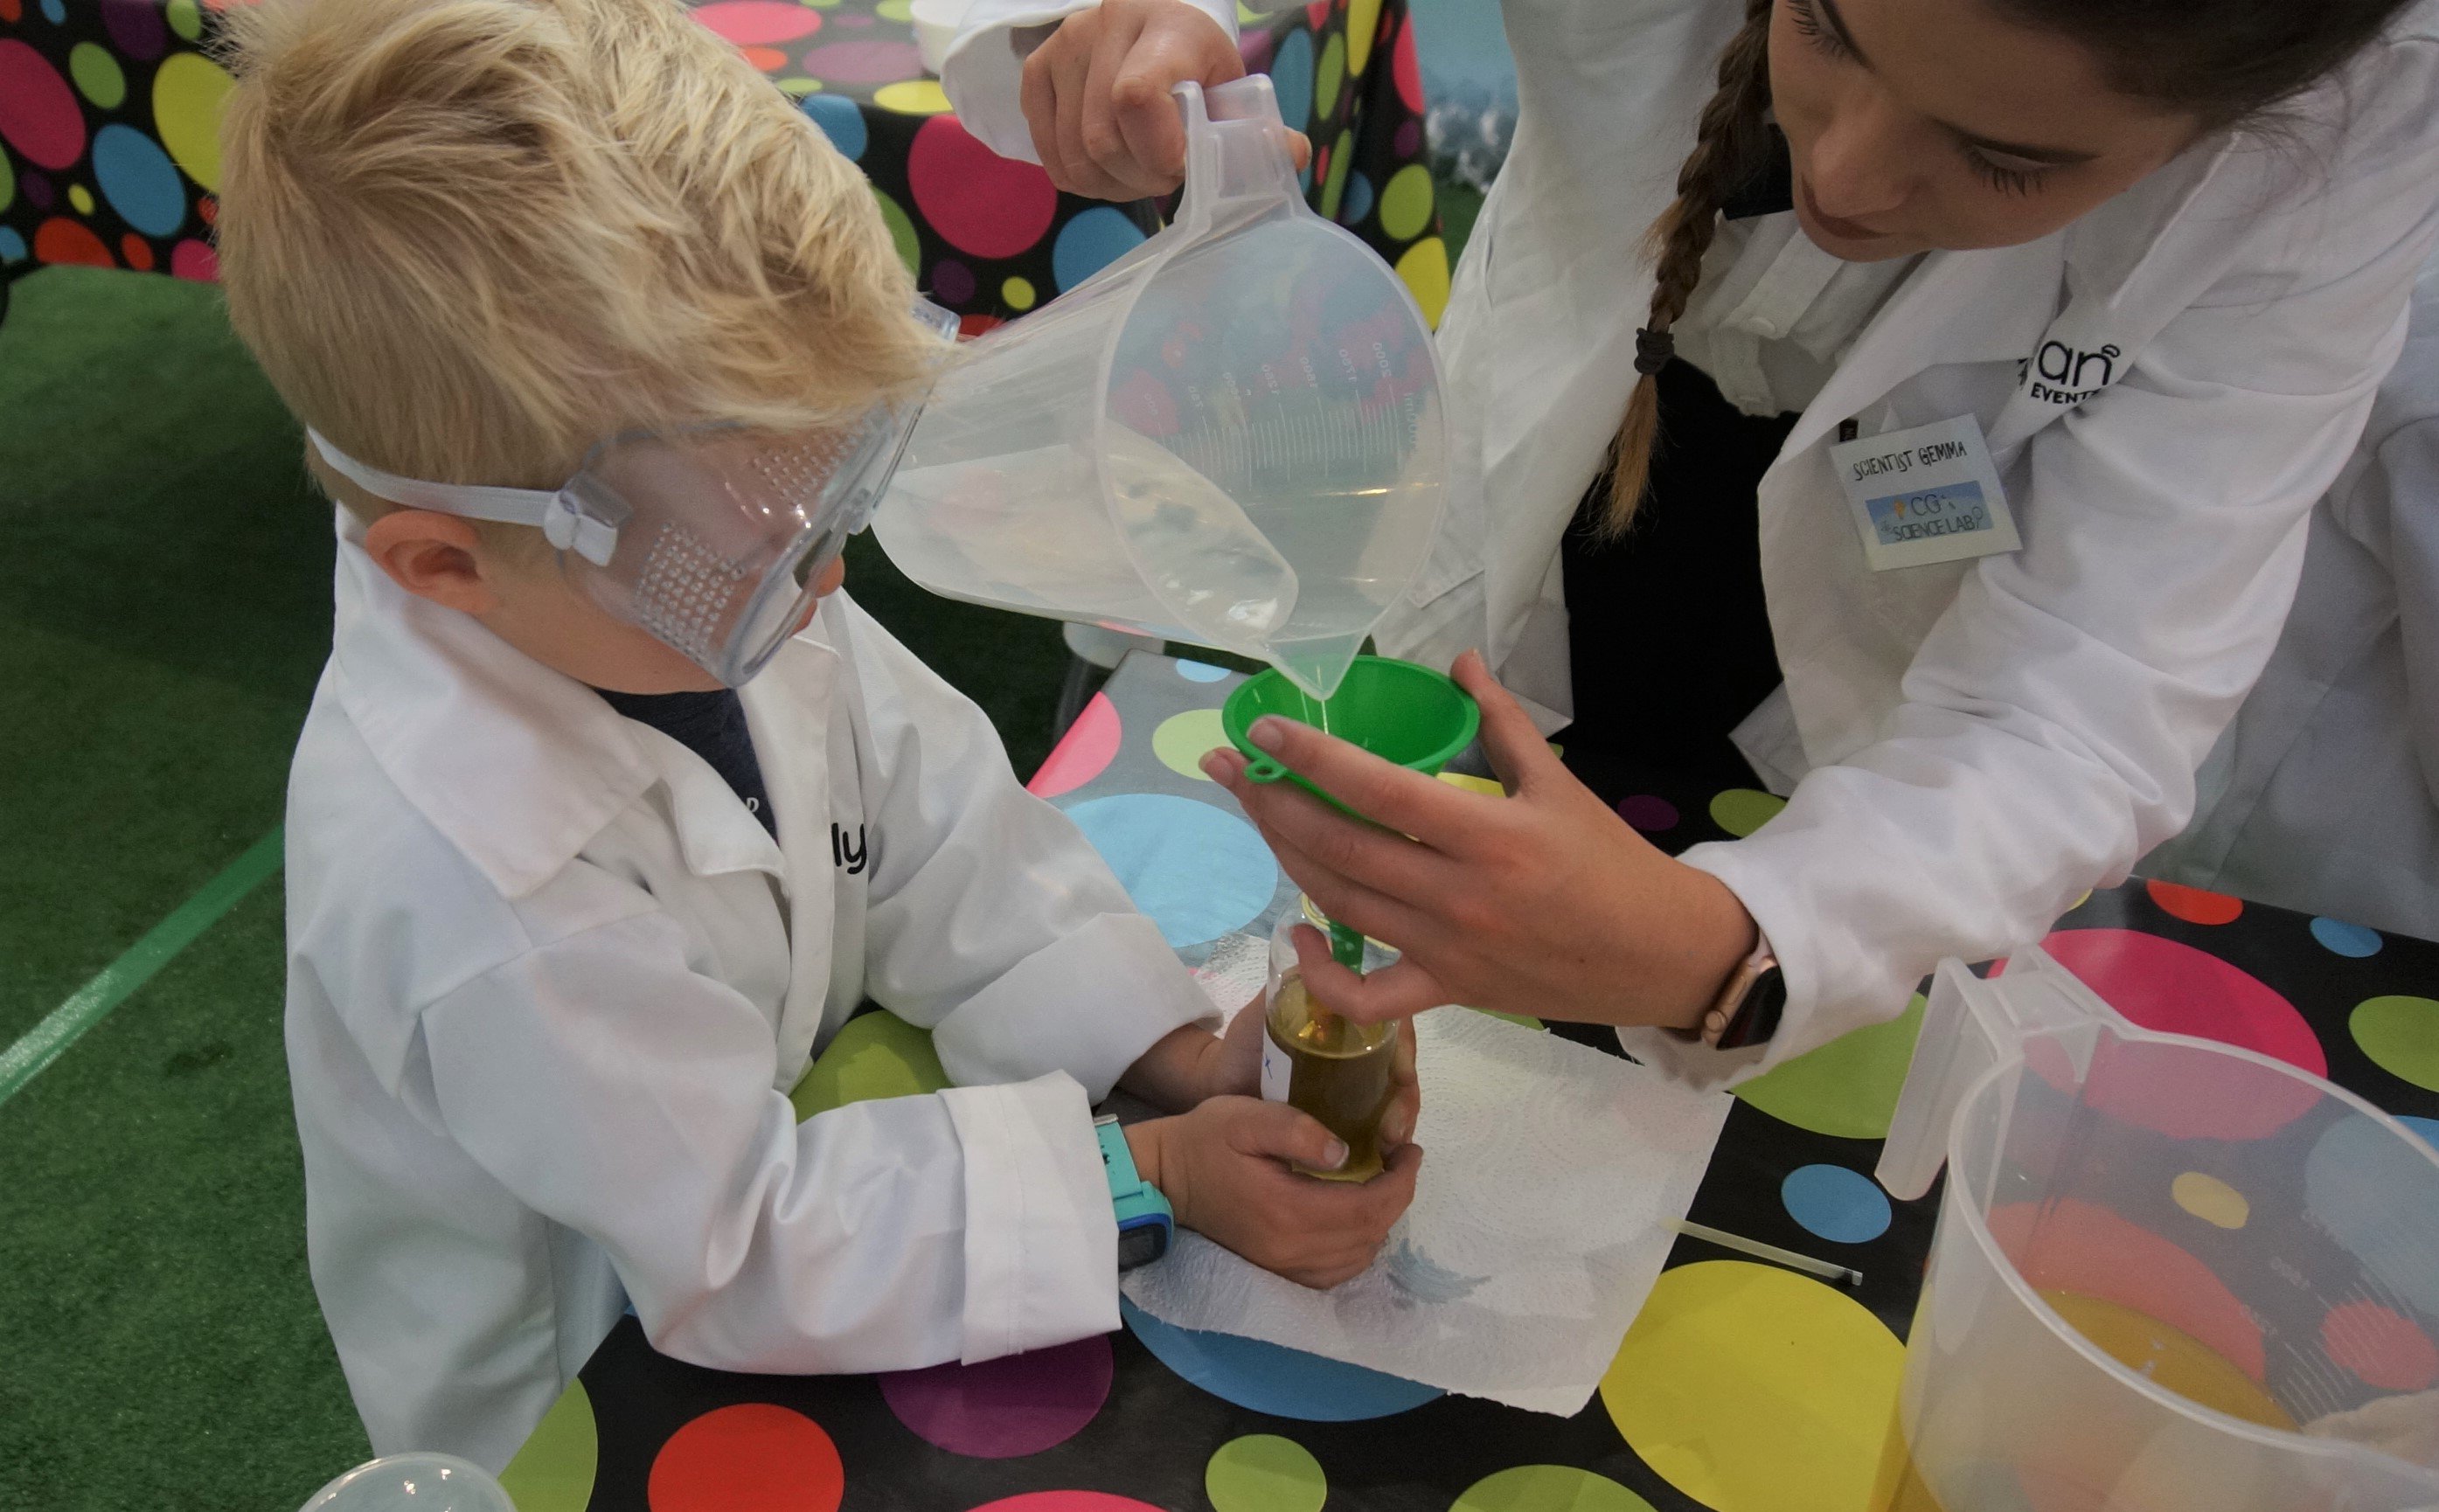 Review: Science Lab Workshop at Capegate Shopping Centre